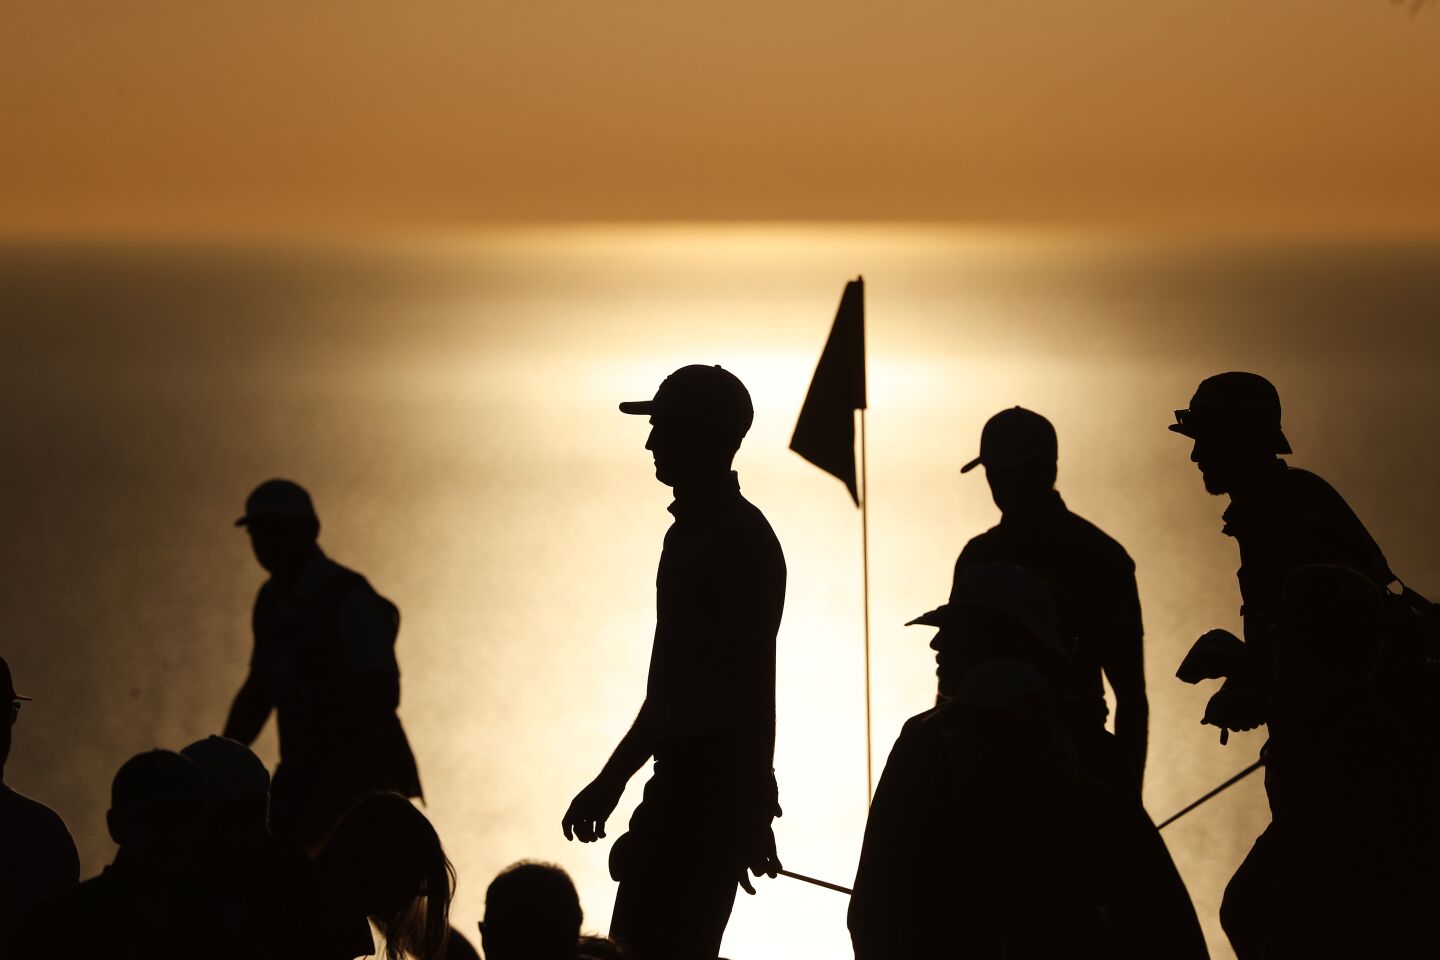 As the sun begins to set, golfers pass the 17th hole during the fourth round of the Farmers Insurance Open at Torrey Pines Golf Course in La Jolla on Jan. 29.